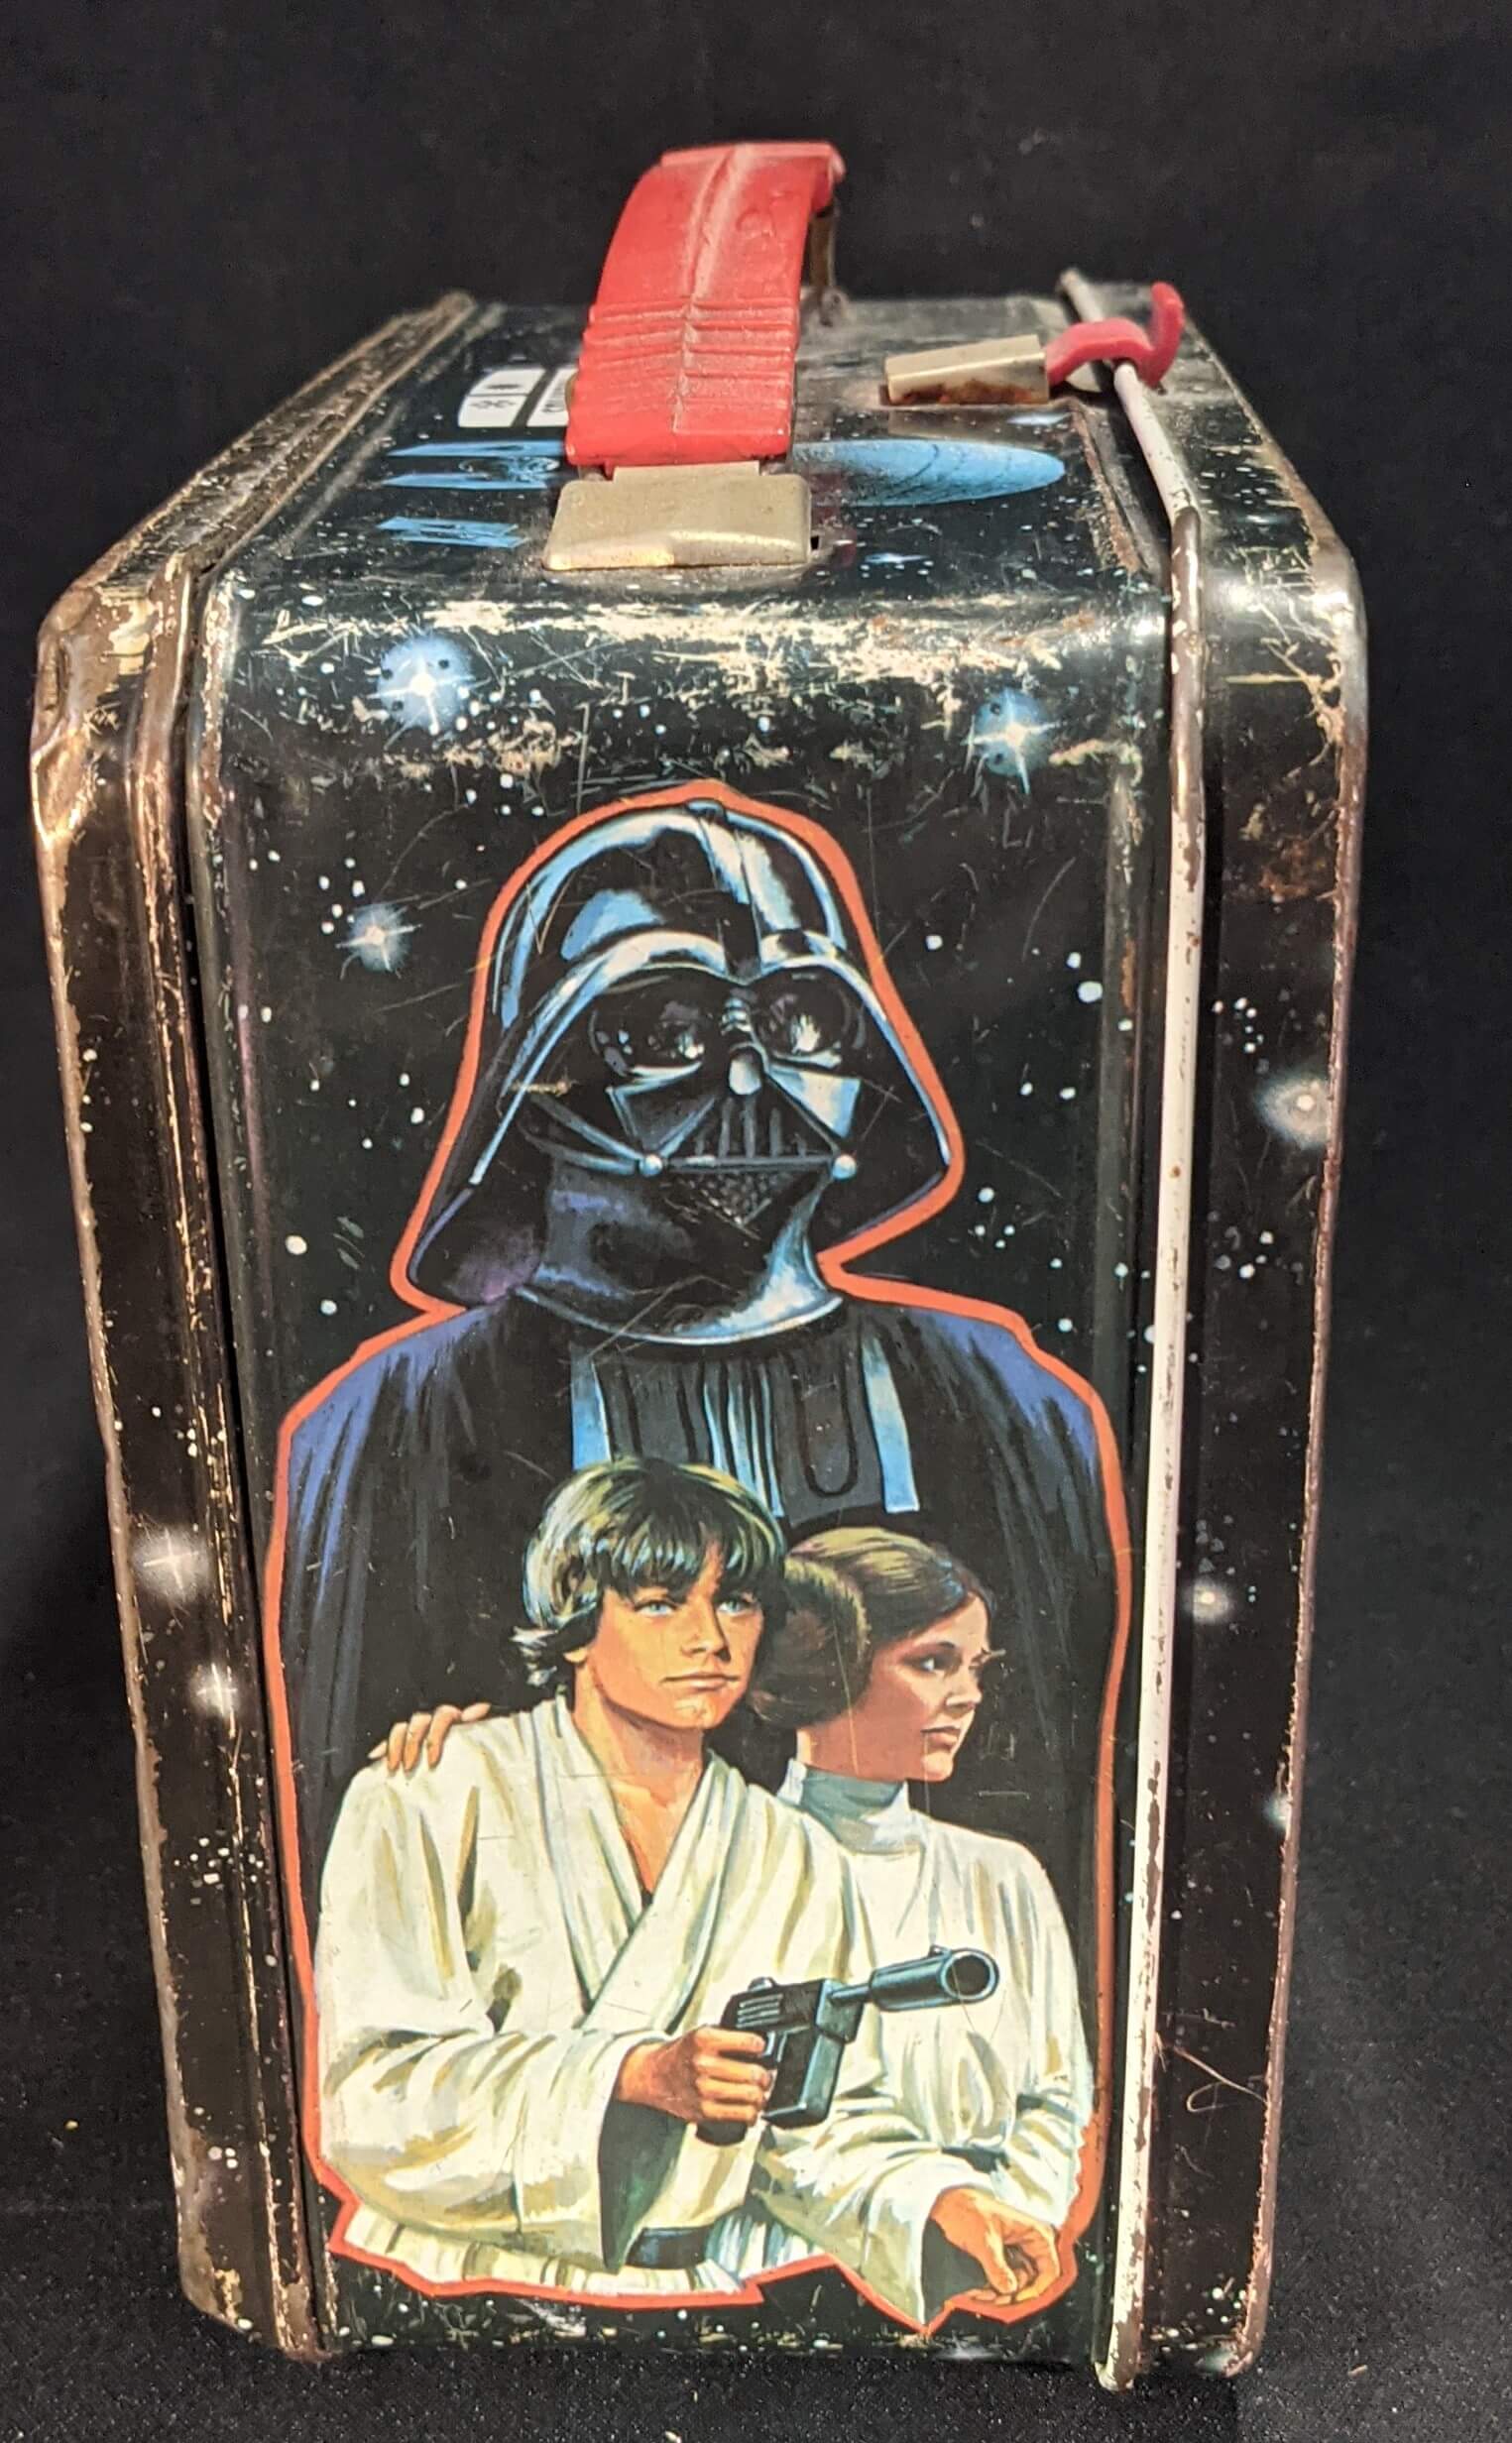 1977 Star Wars Thermos (1D)